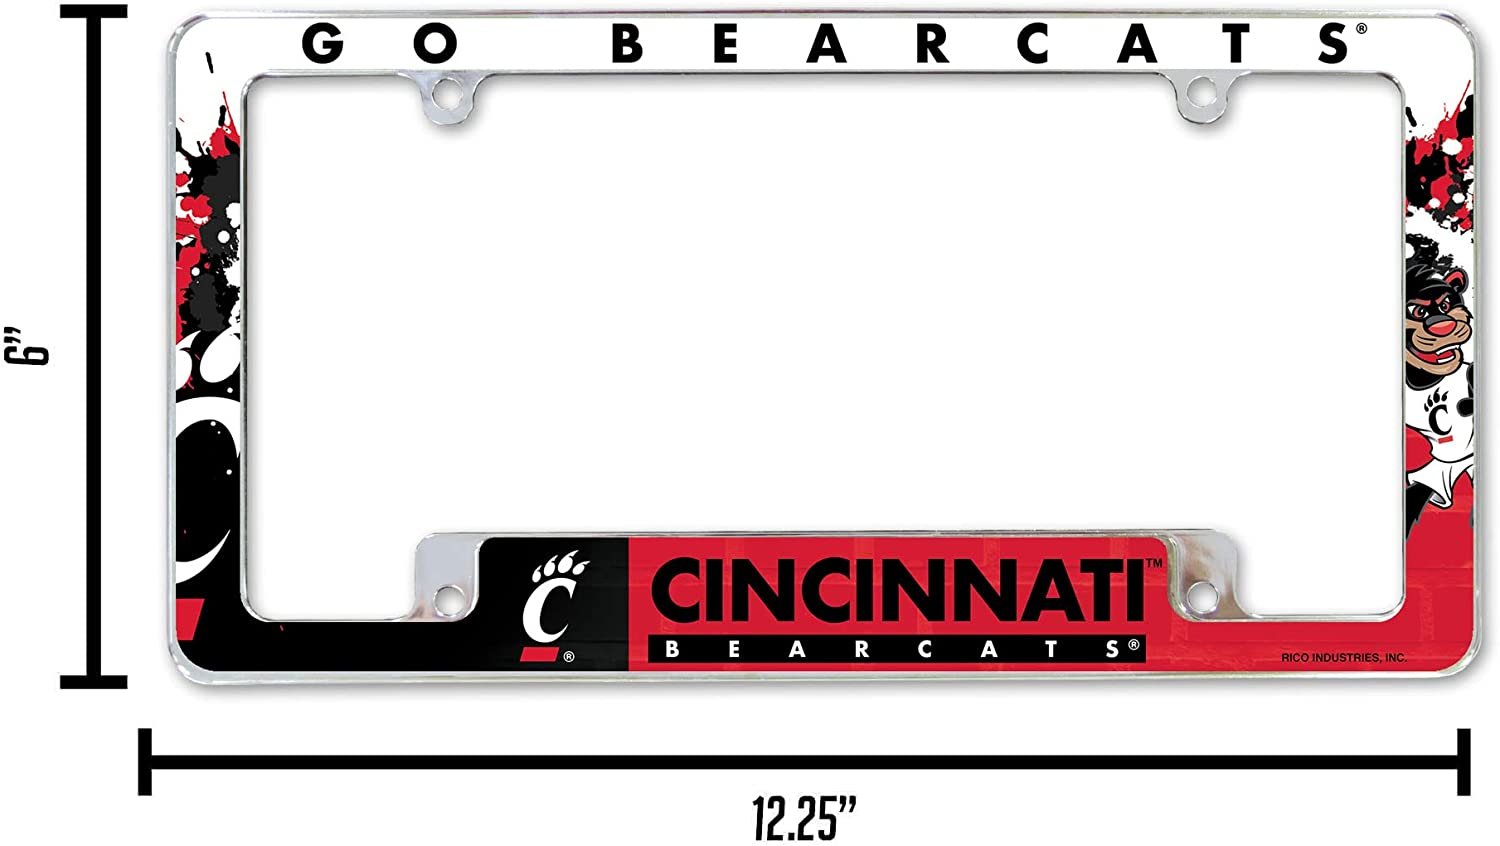 University of Cincinnati Bearcats Metal License Plate Frame Chrome Tag Cover All Over Design 6x12 Inch